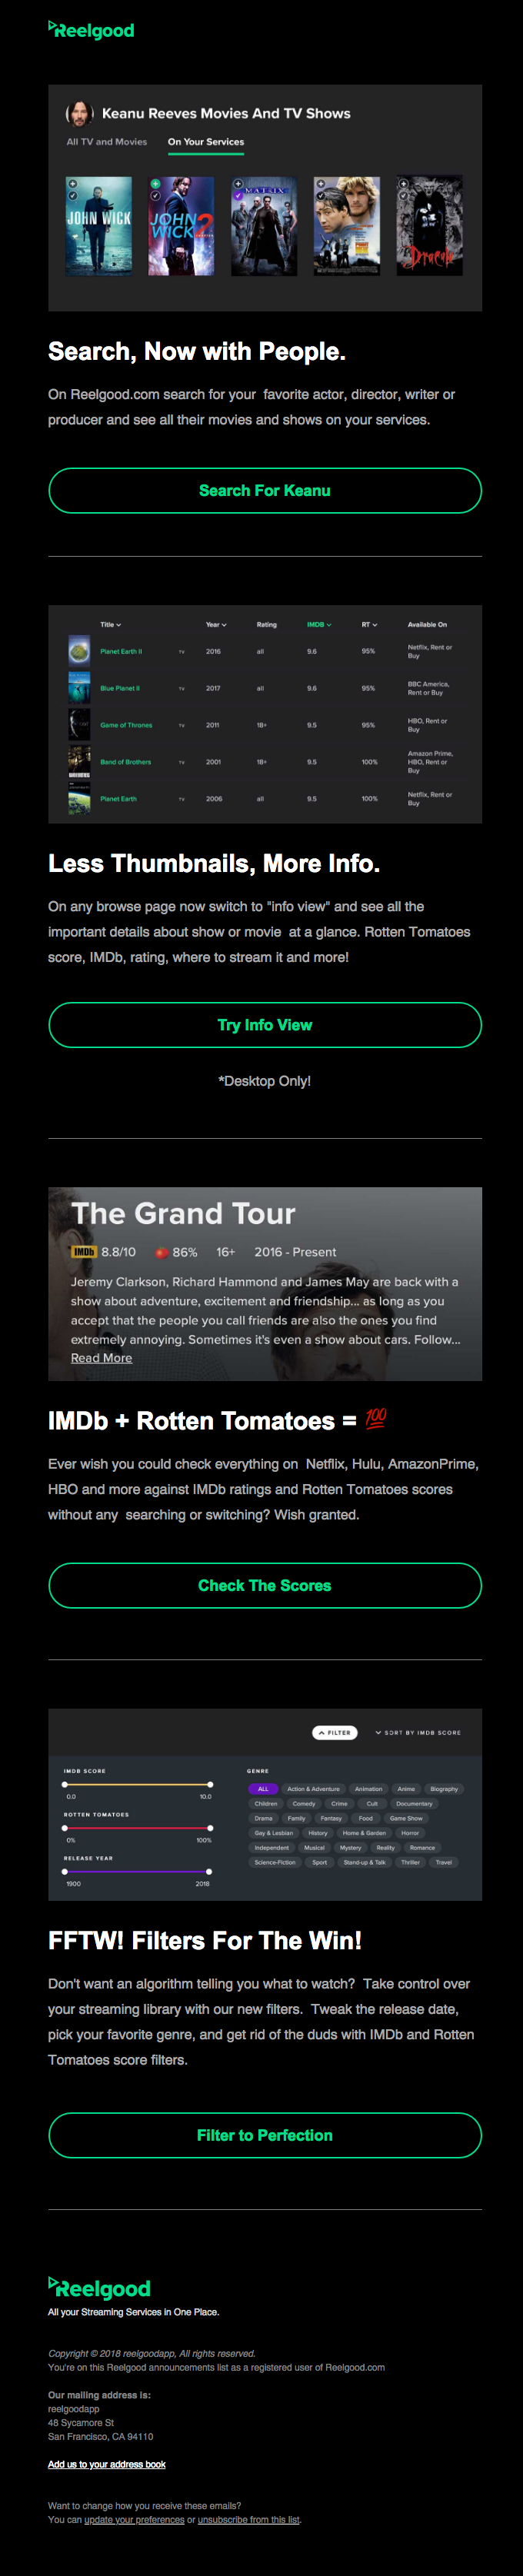 What’s New on Reelgood.com? Hint: 🍅 & More